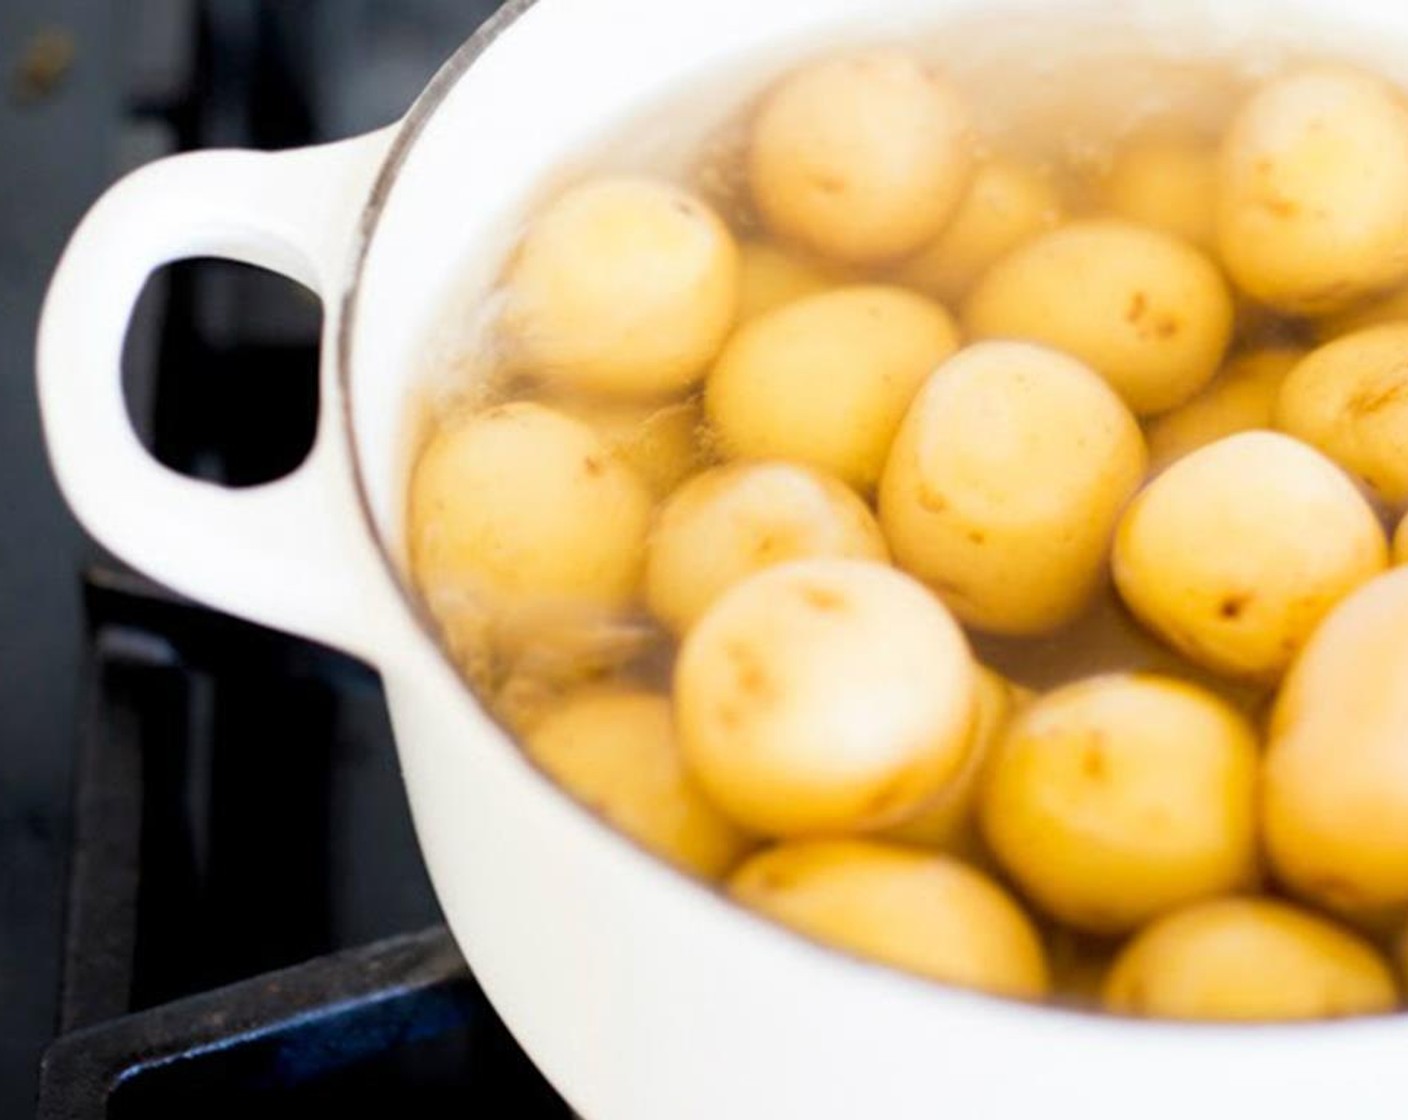 step 2 Blanch Baby Potatoes (1.5 lb) in salted boiling water, until just tender, about 10 to 15 minutes, depending on size.